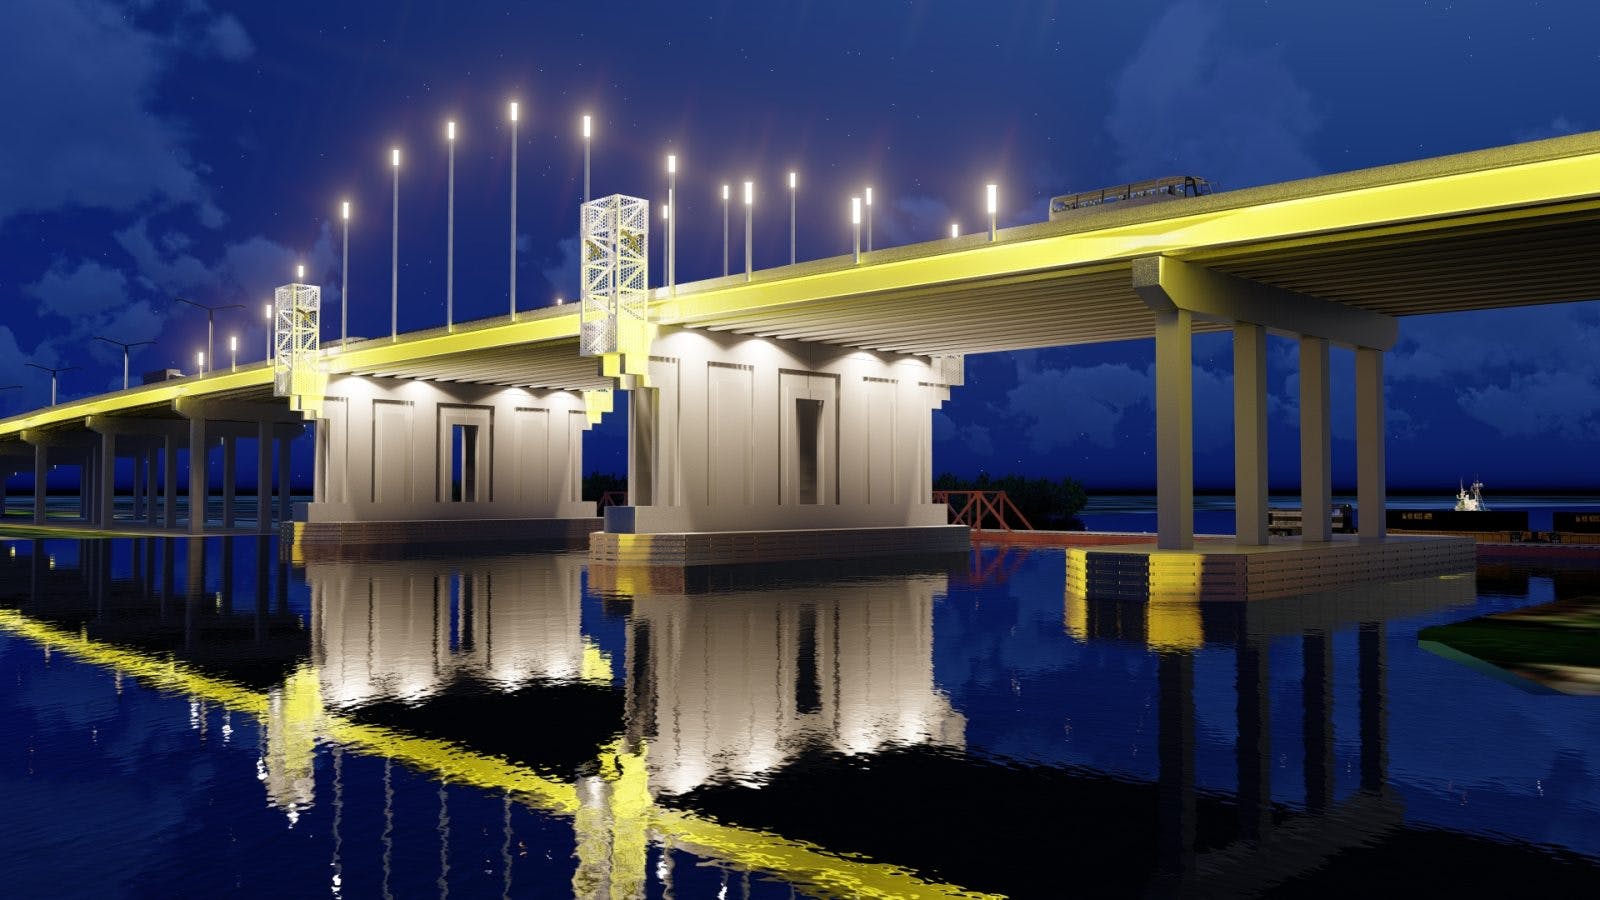 Artist's rendering of what the new Calcasieu River Bridge could look like